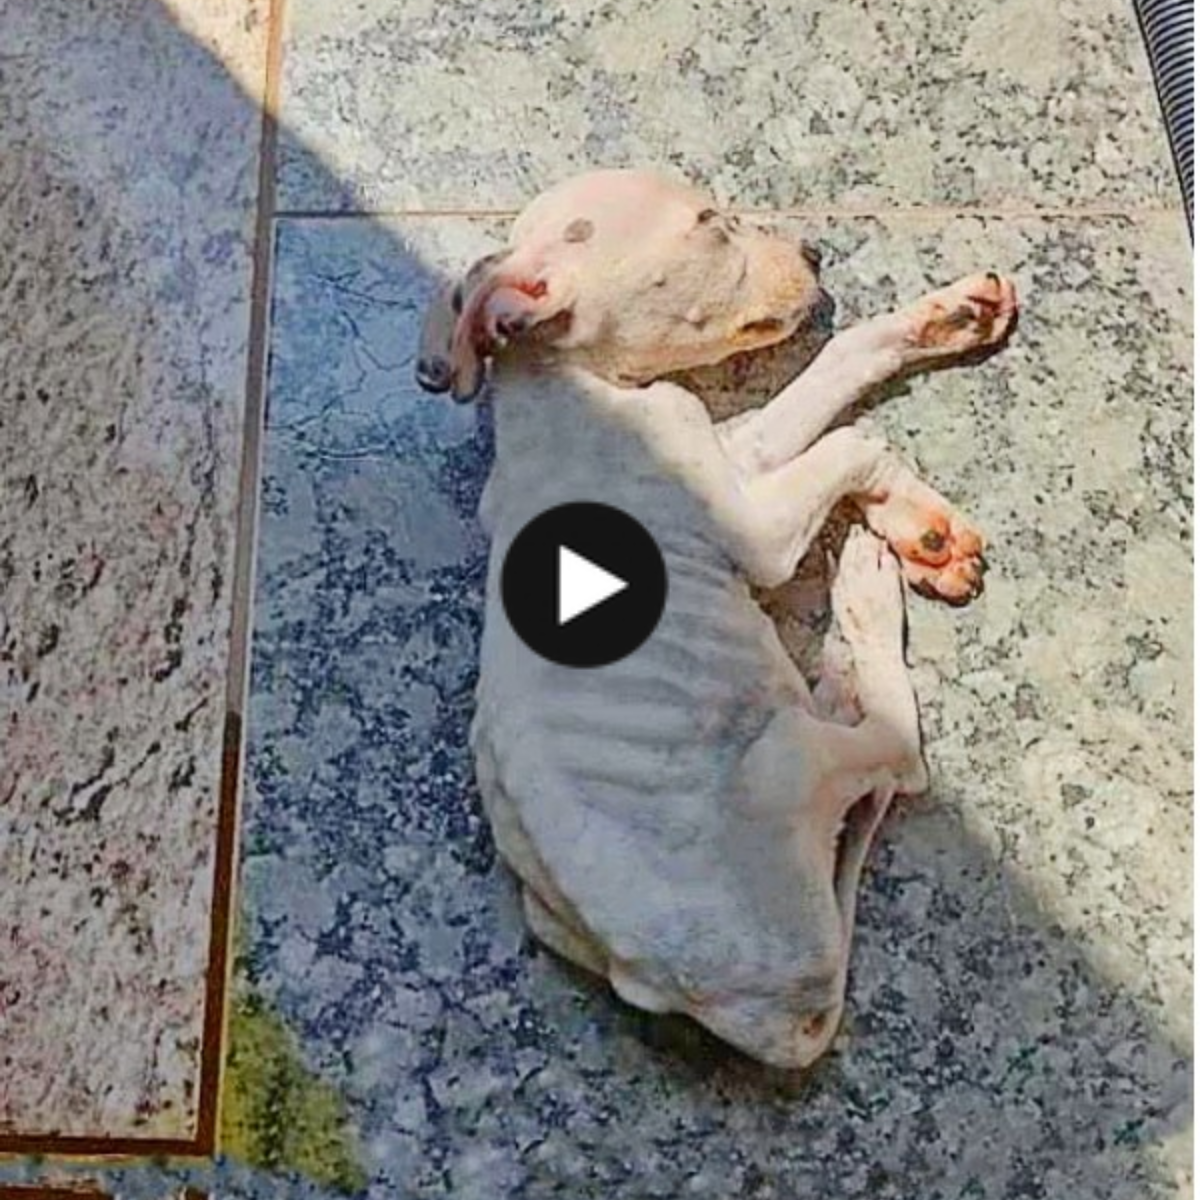 This poor, malnourished puppy was saved (VIDEO)